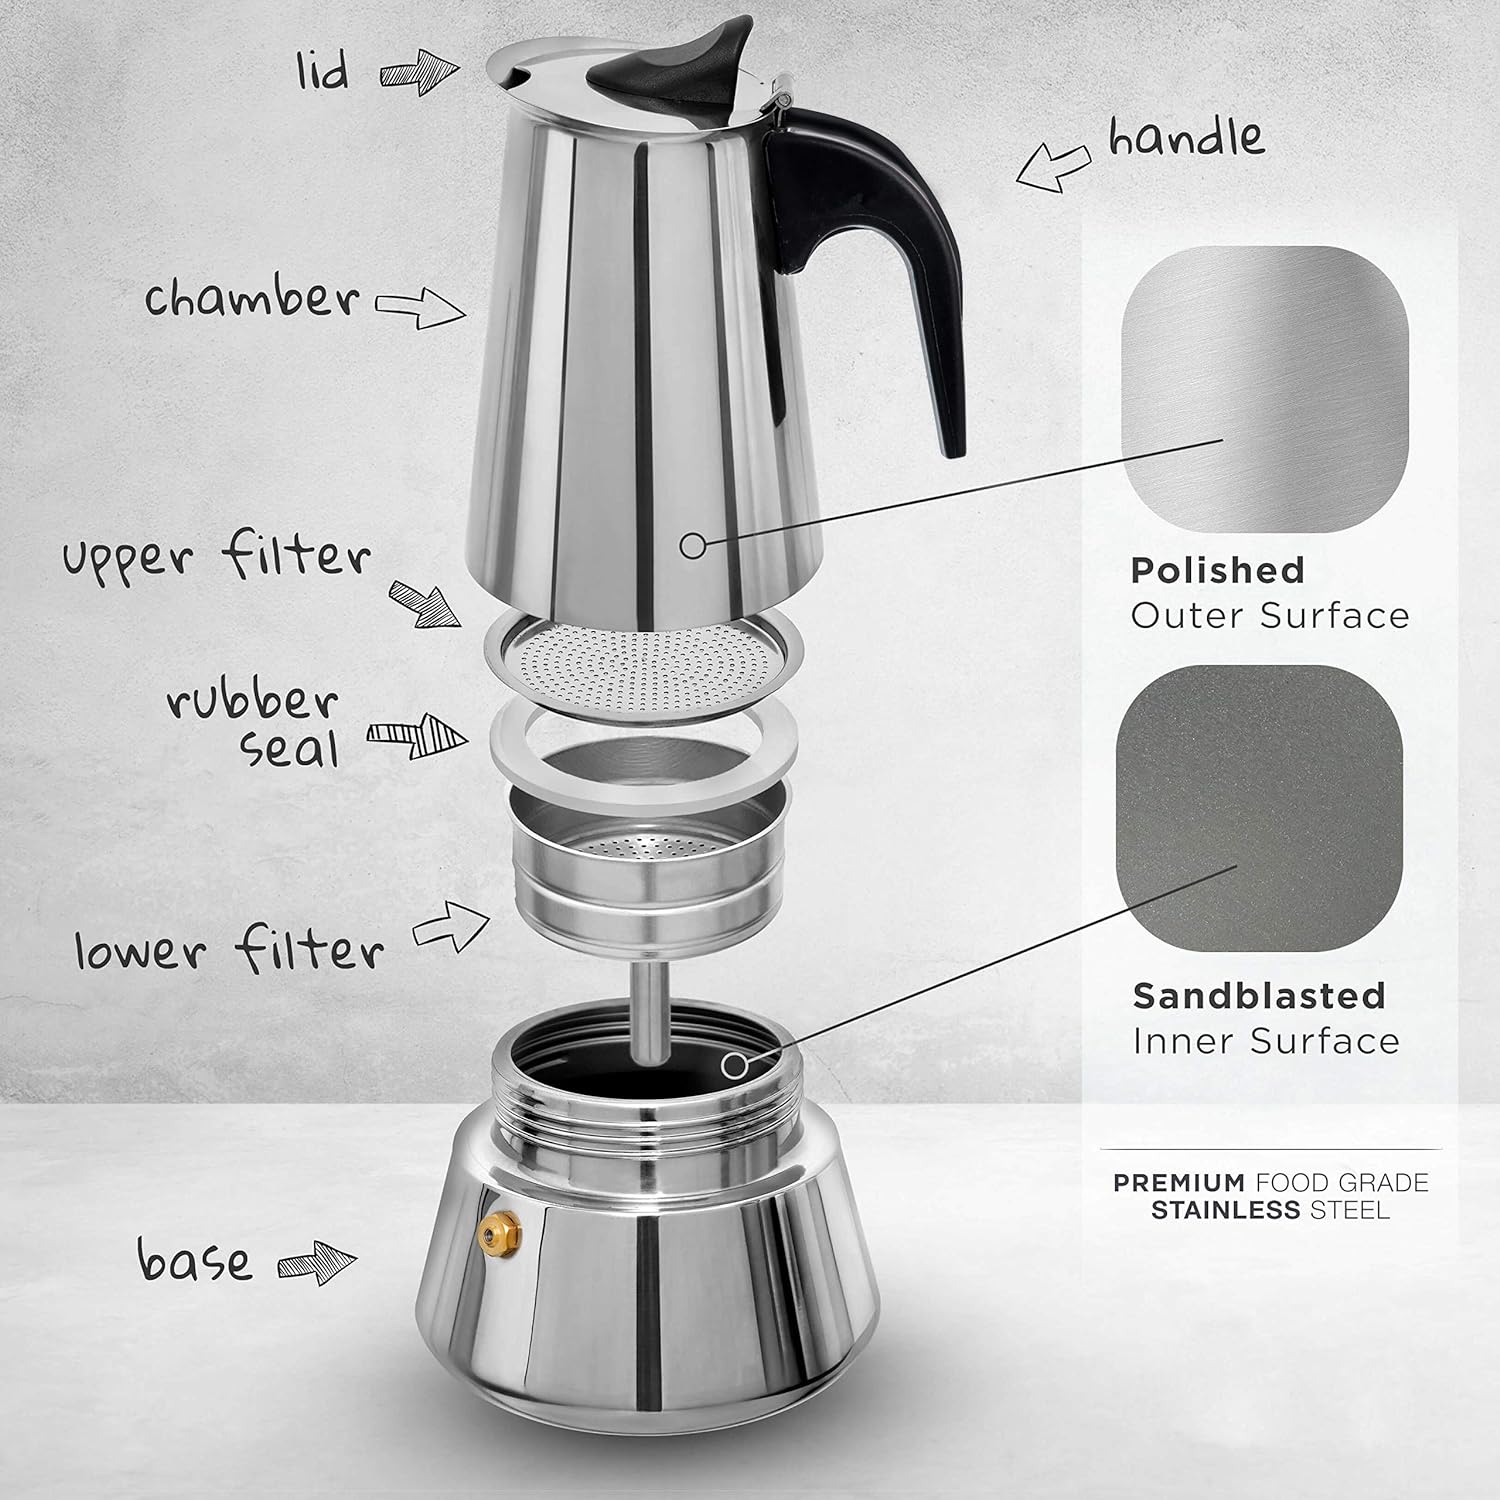 FCUS Stovetop Espresso Maker, Moka Pot, 2 Cup Percolator Italian Coffee Maker, Classic Cafe Maker, Stainless Steel, Suitable For Induction Cookers (Silver, 2 Cup)